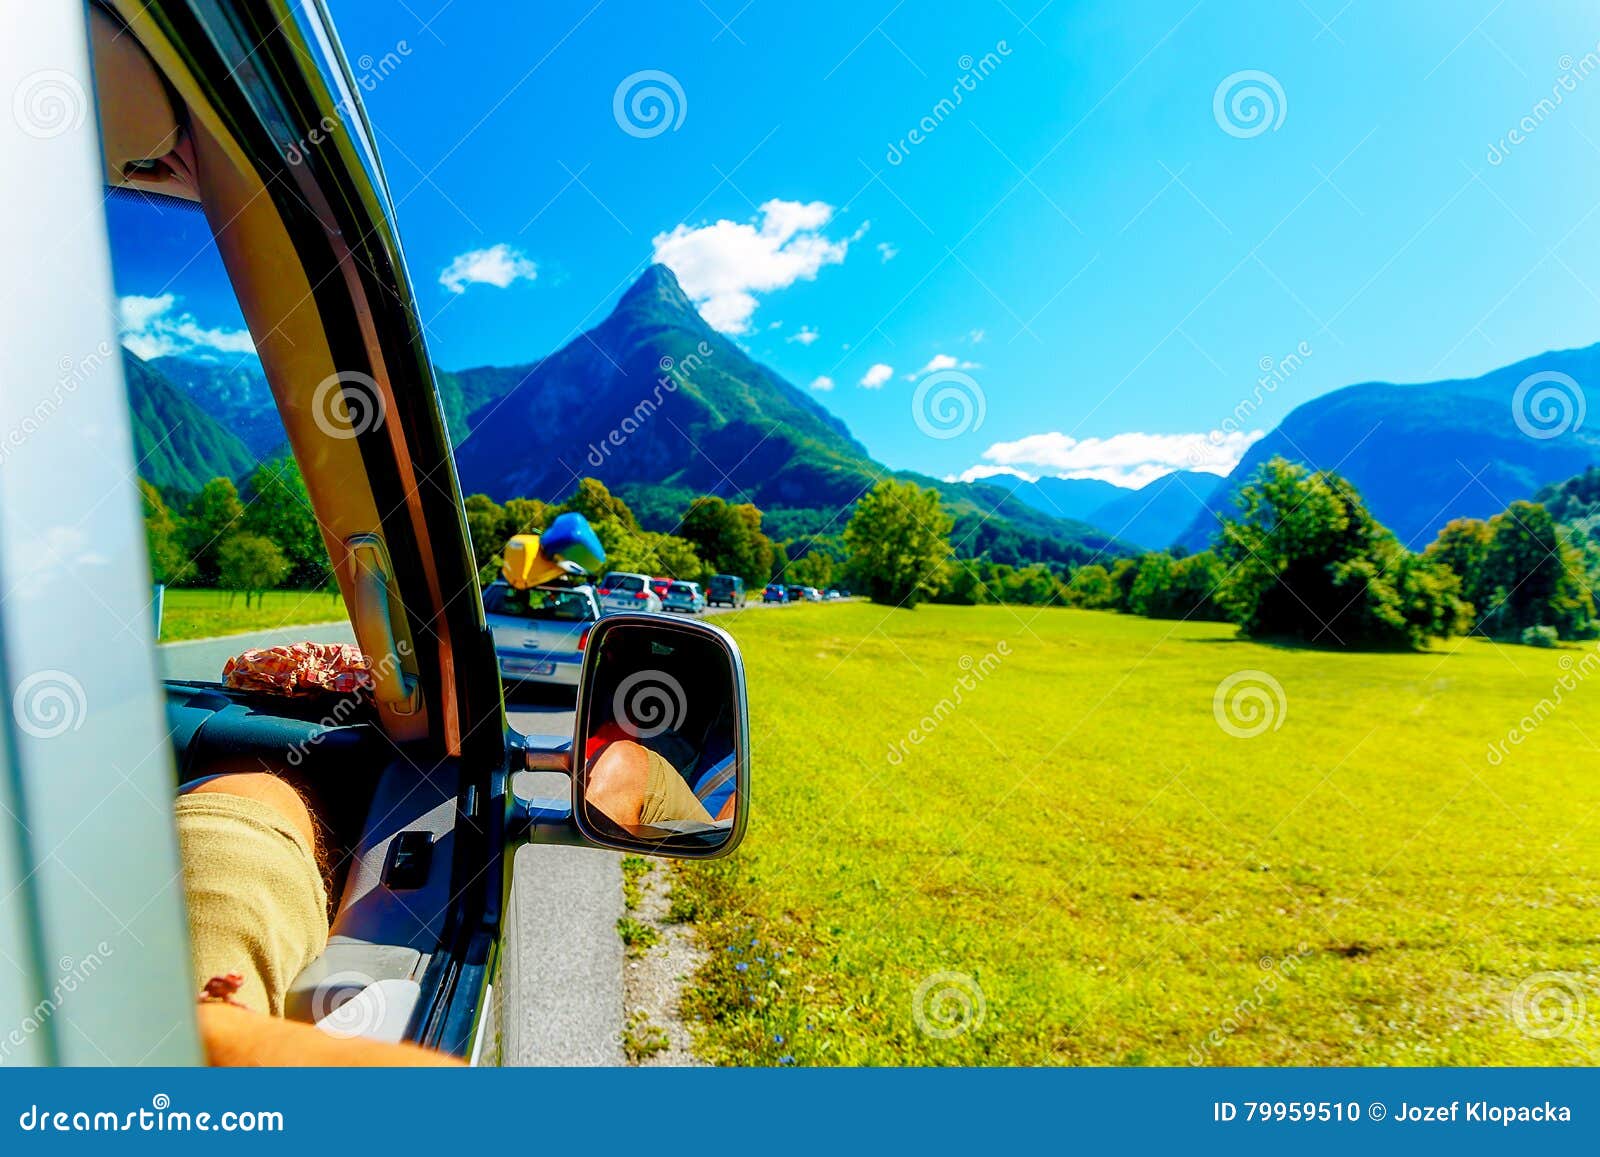 free summer car travelling road trip in beautiful mountain landscape